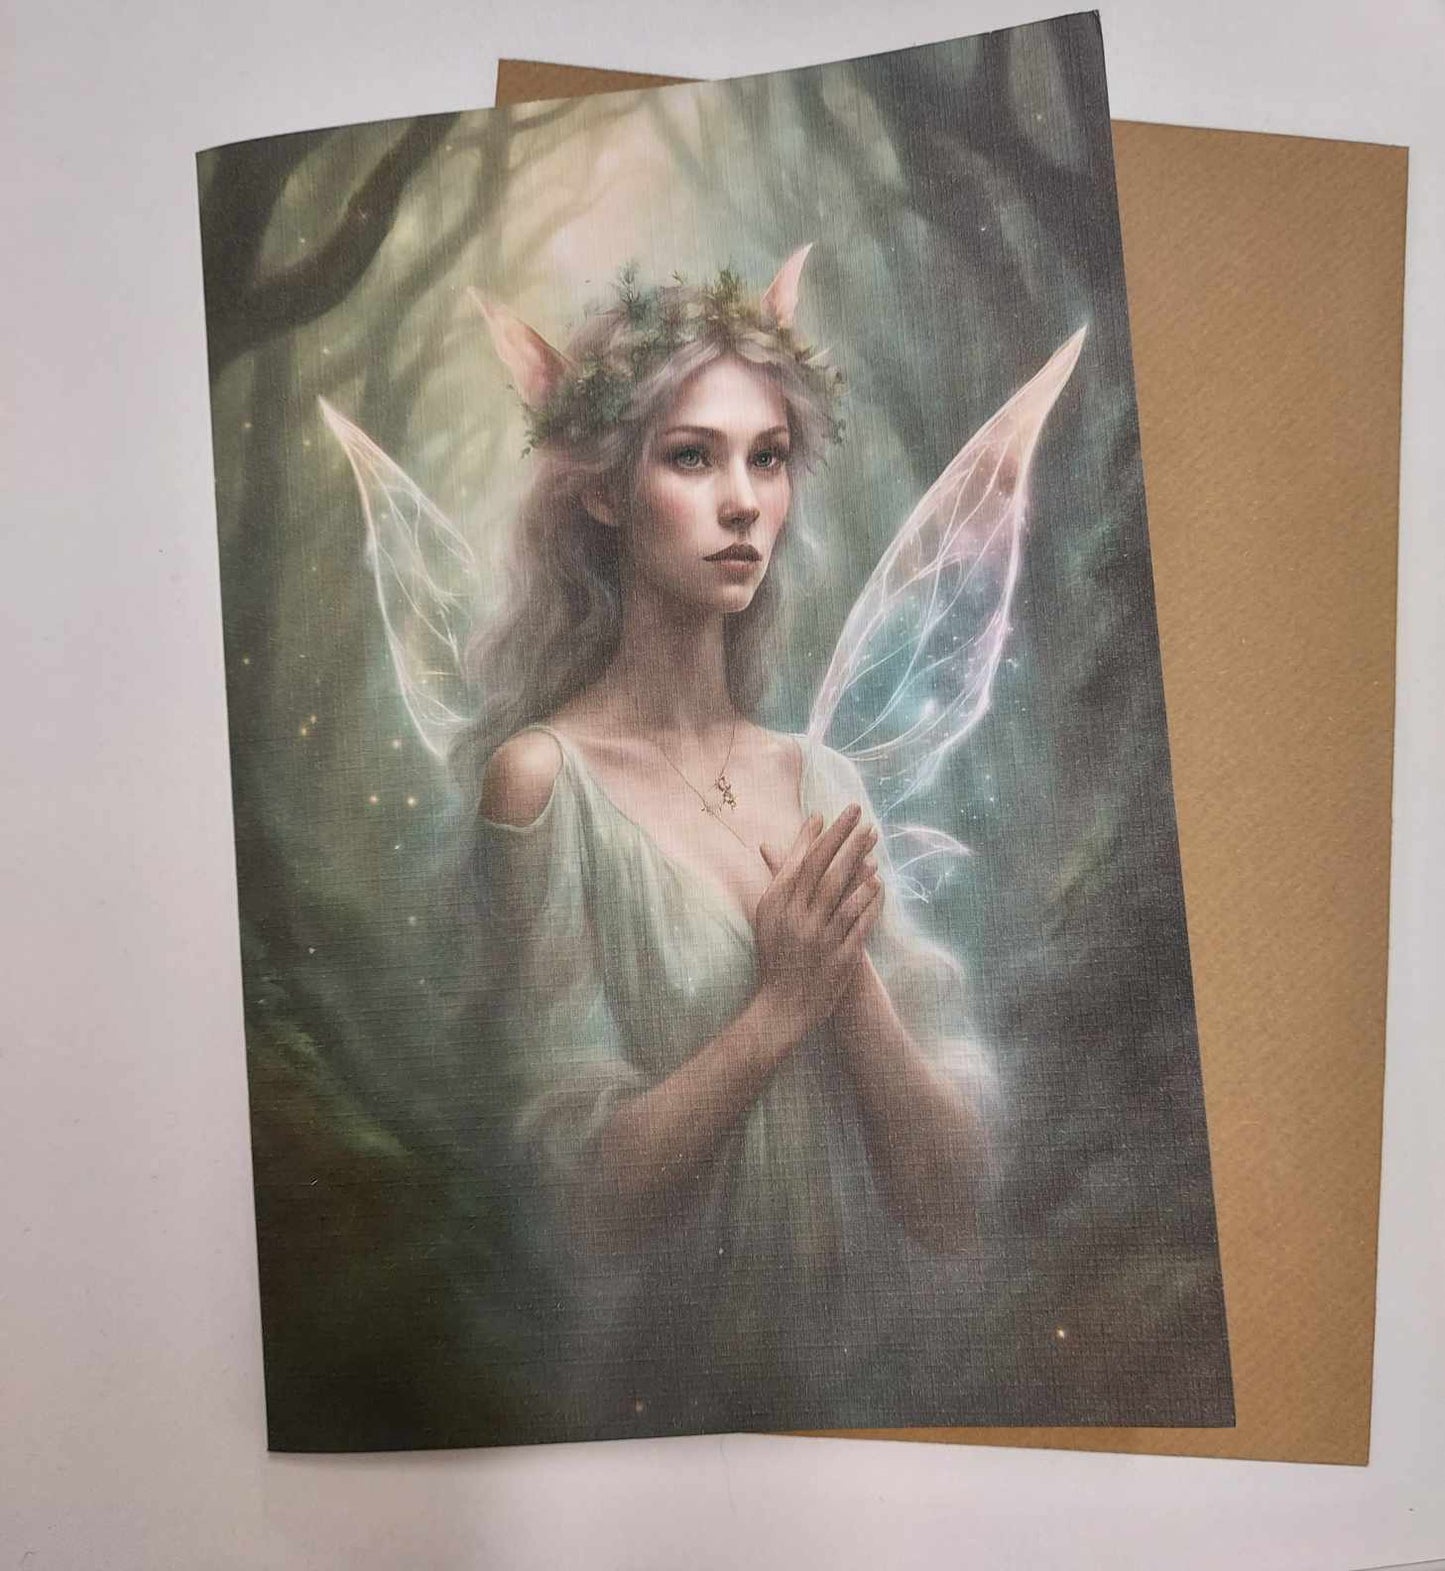 Praying Pixie Fantasy Art A5 Mother's Day Card Recycled Linen Print